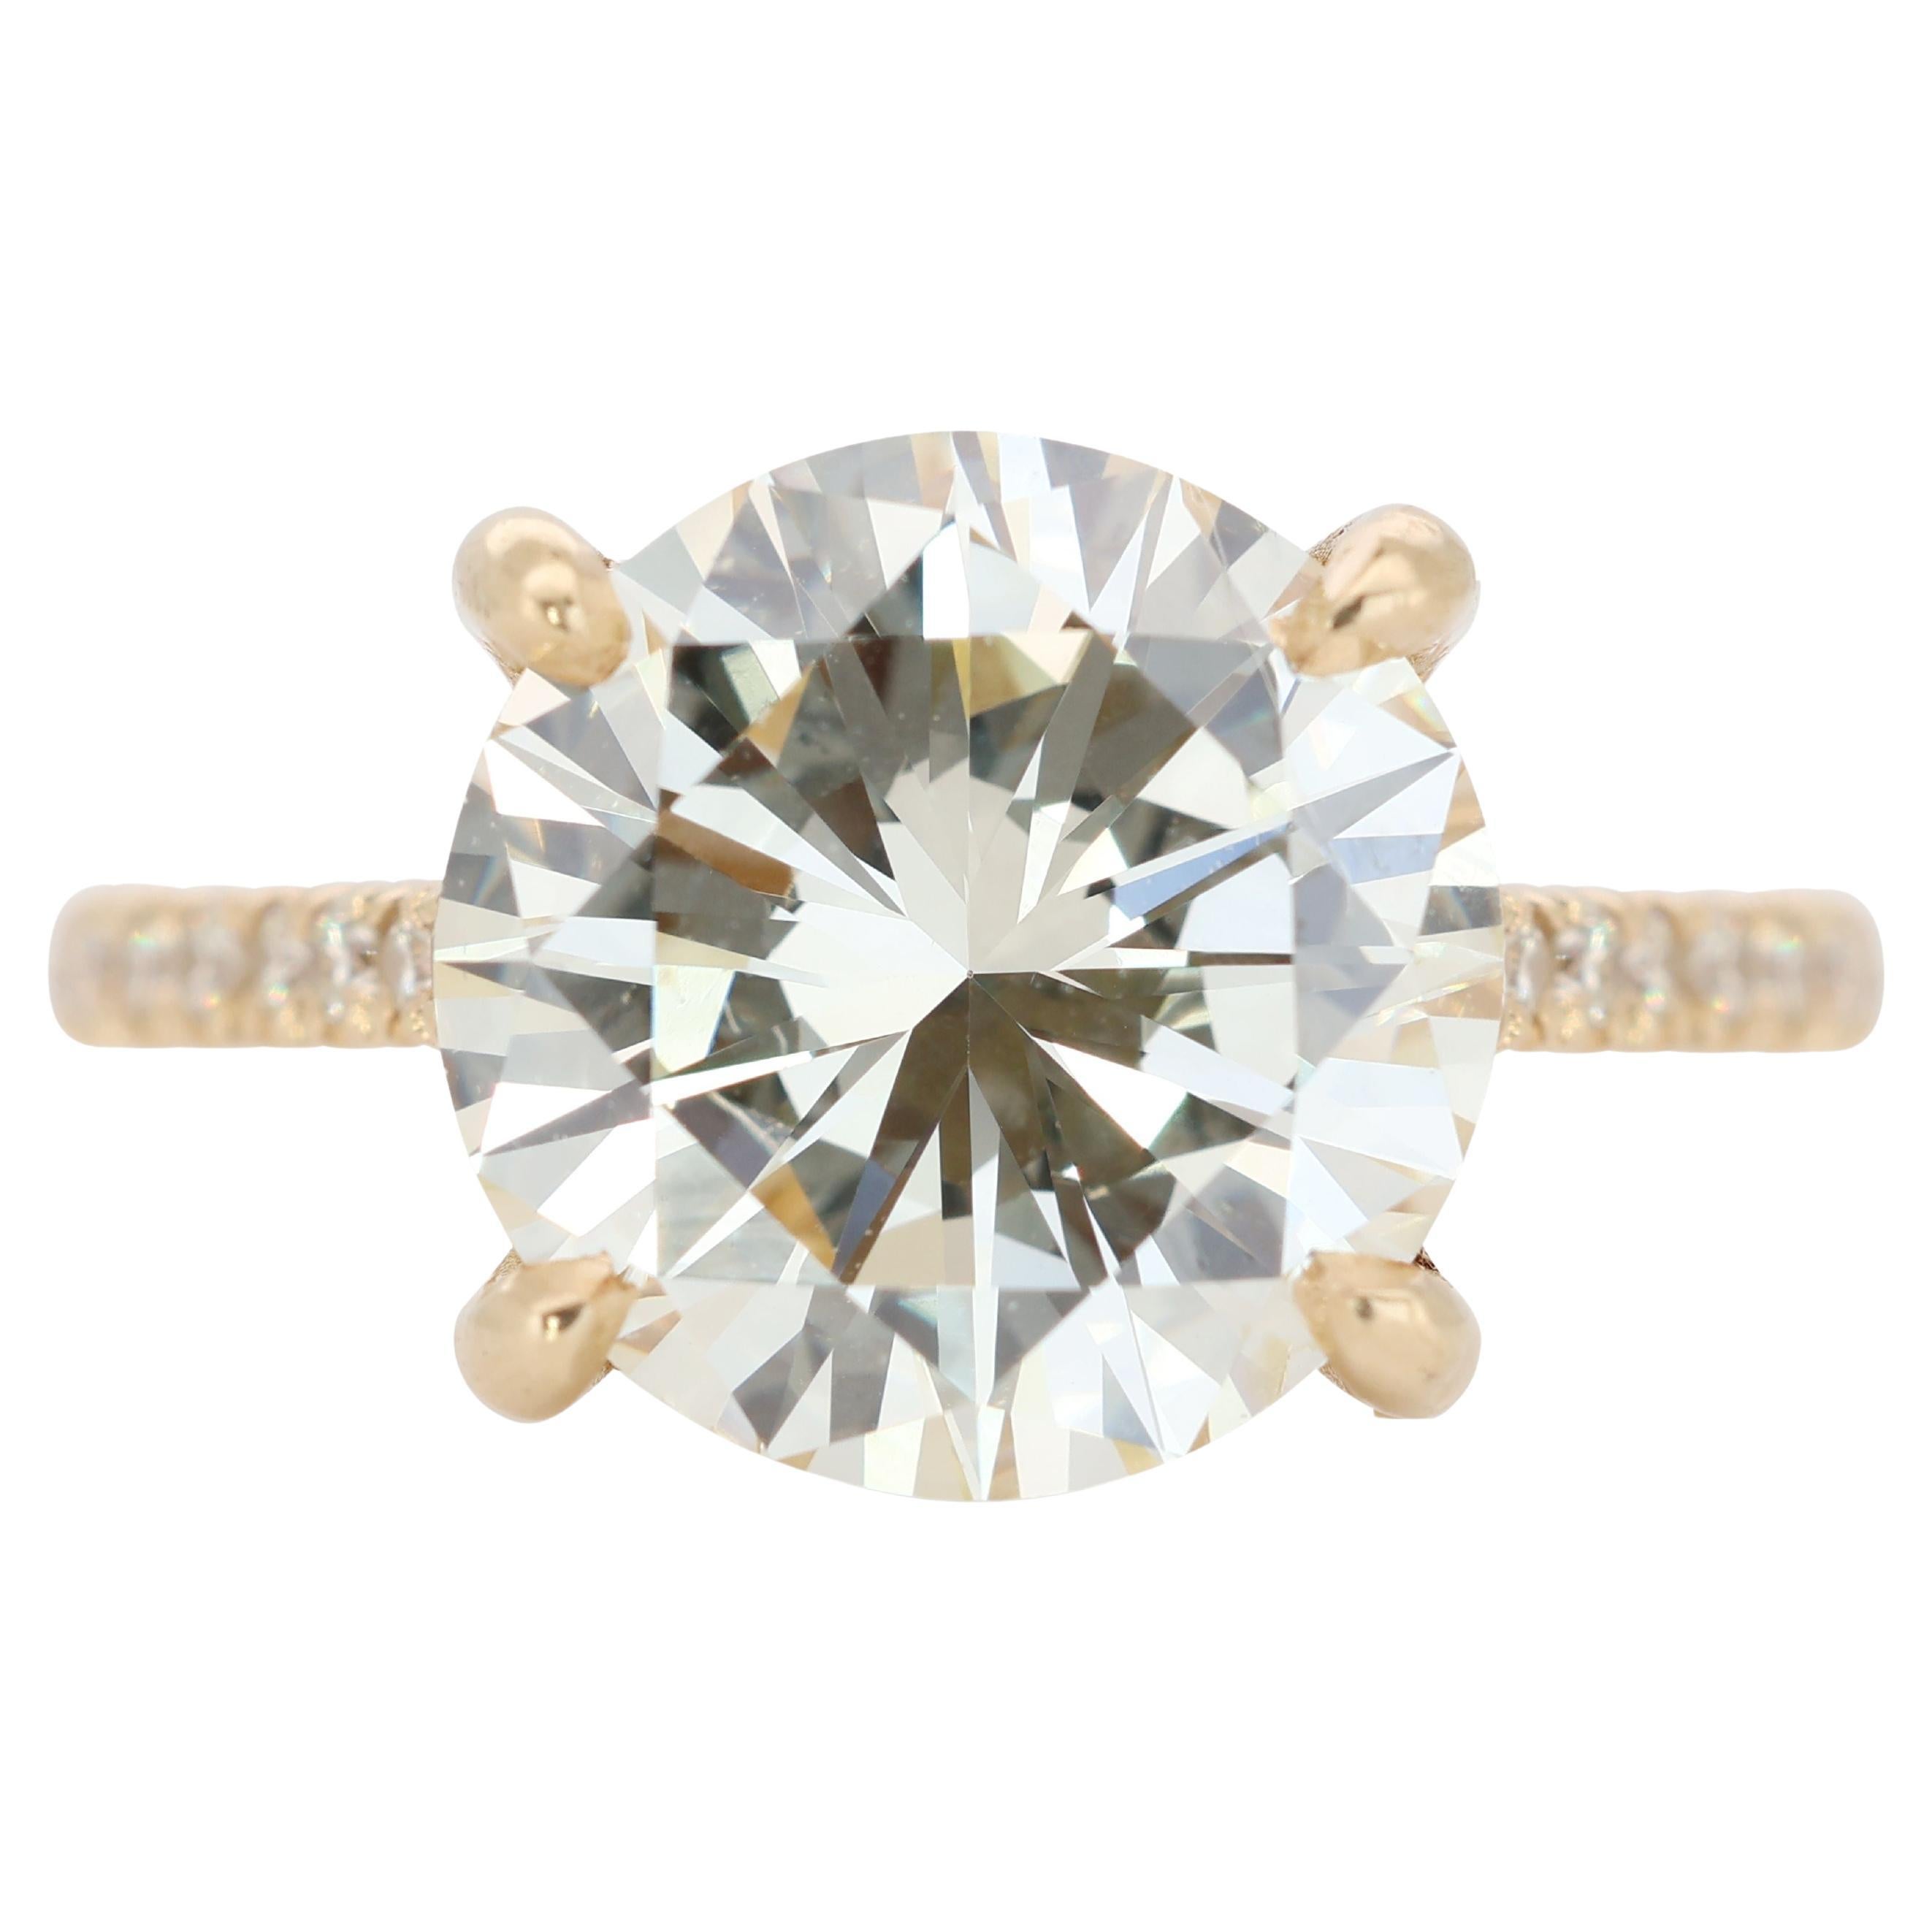 Captivating 3.77ct Pave Diamond Ring in 18K Yellow Gold For Sale